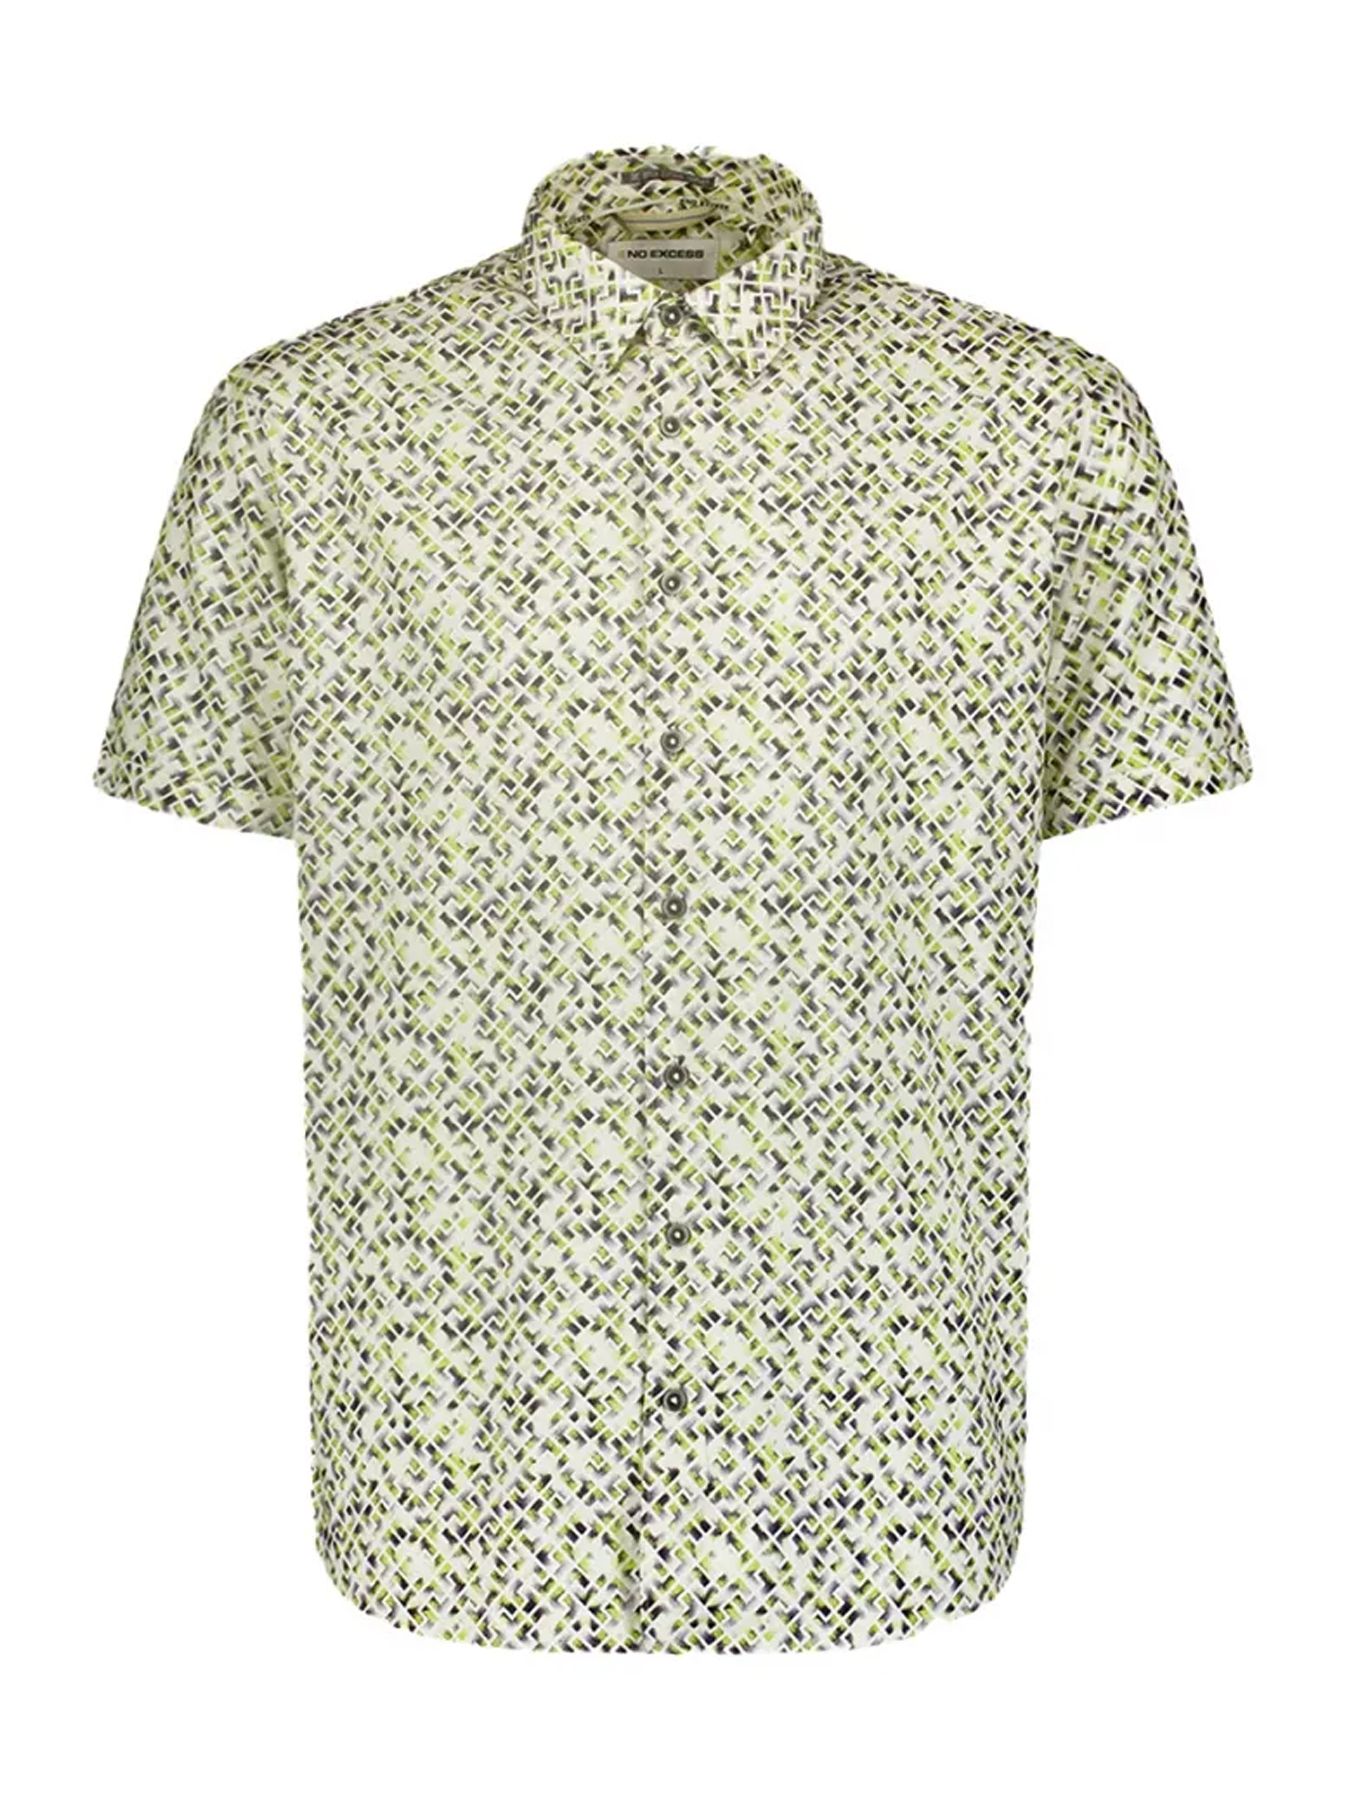 No Excess Shirt Short Sleeve Allover Printed 056 lime 2900146140043